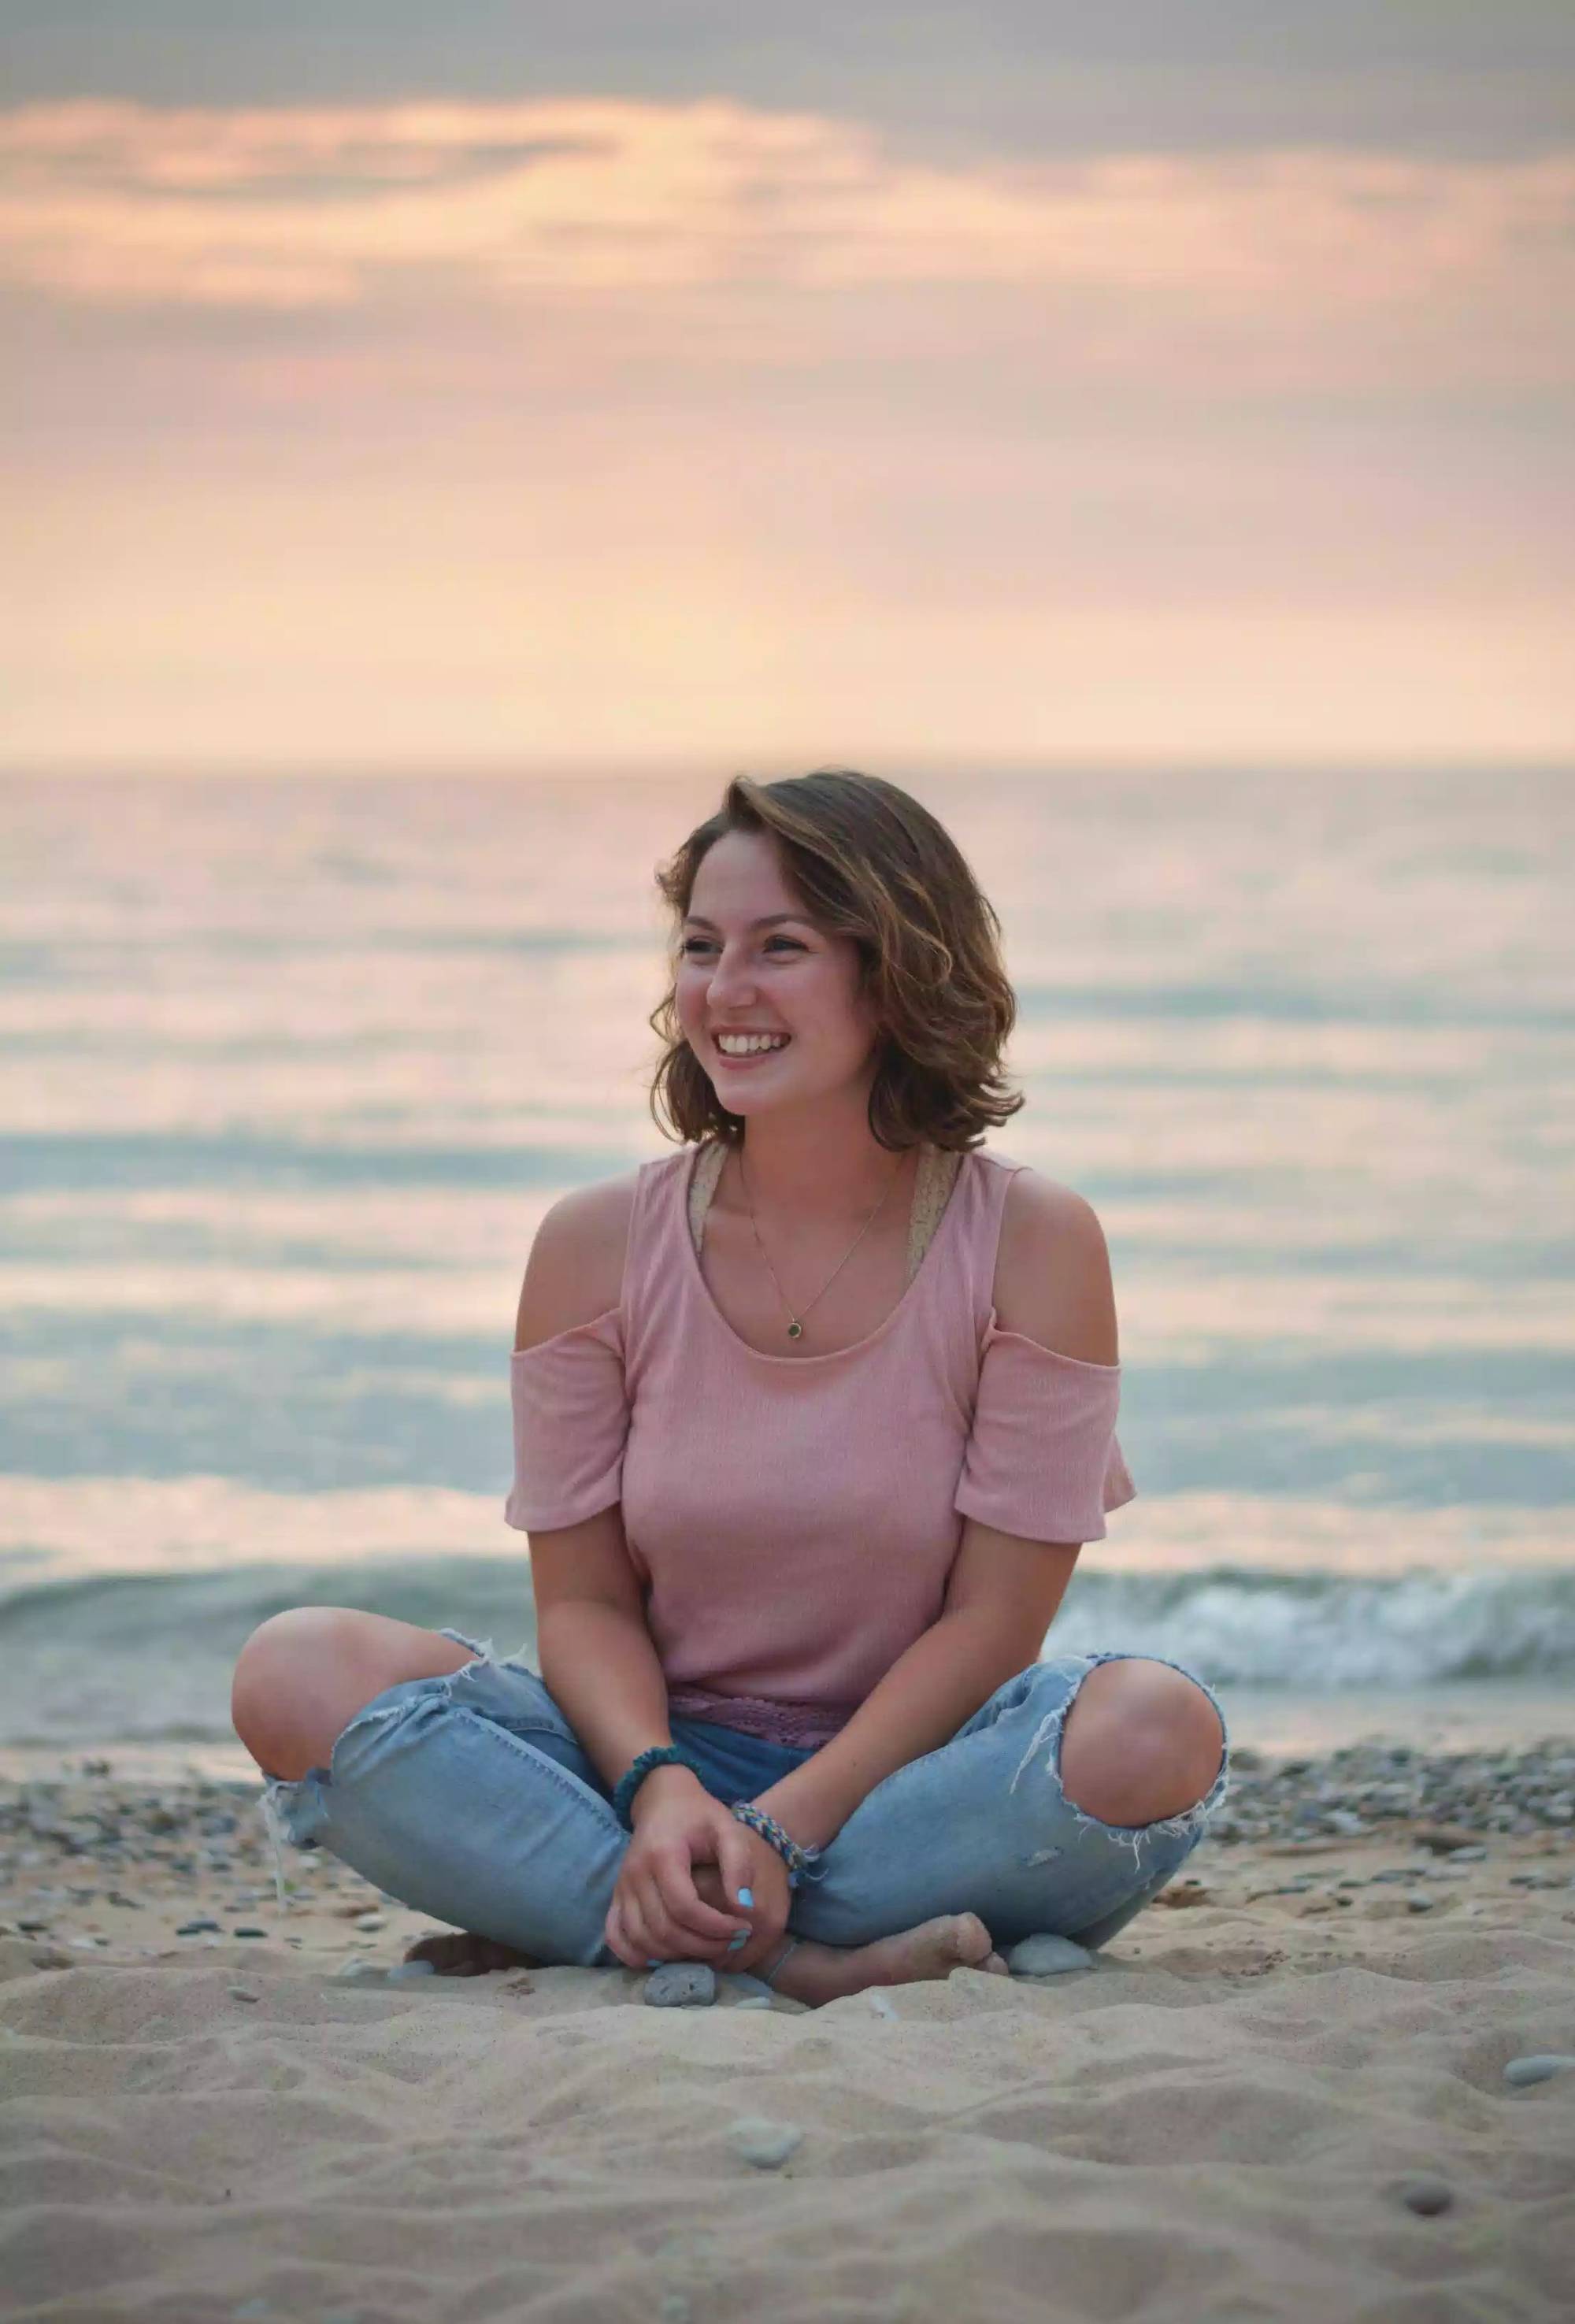 Girl sitting in the sand with a sunset behind her. She is wearing a pink t-shirt and blue jeans and smiling while facing to the left.